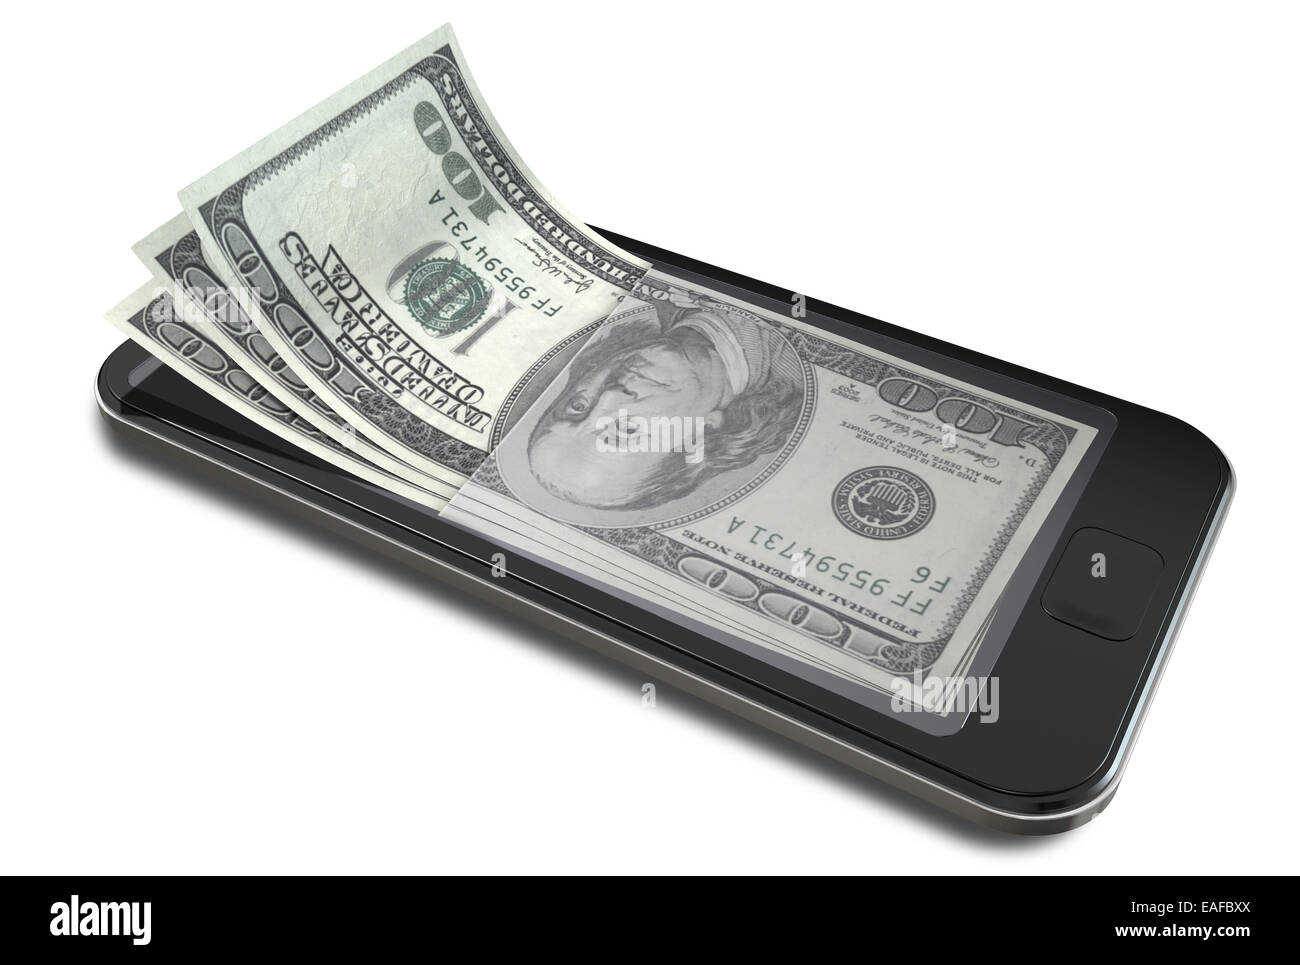 A concept image of a generic smart phone with digital on screen money changing into real us dollar banknotes signifying cell pho Stock Photo